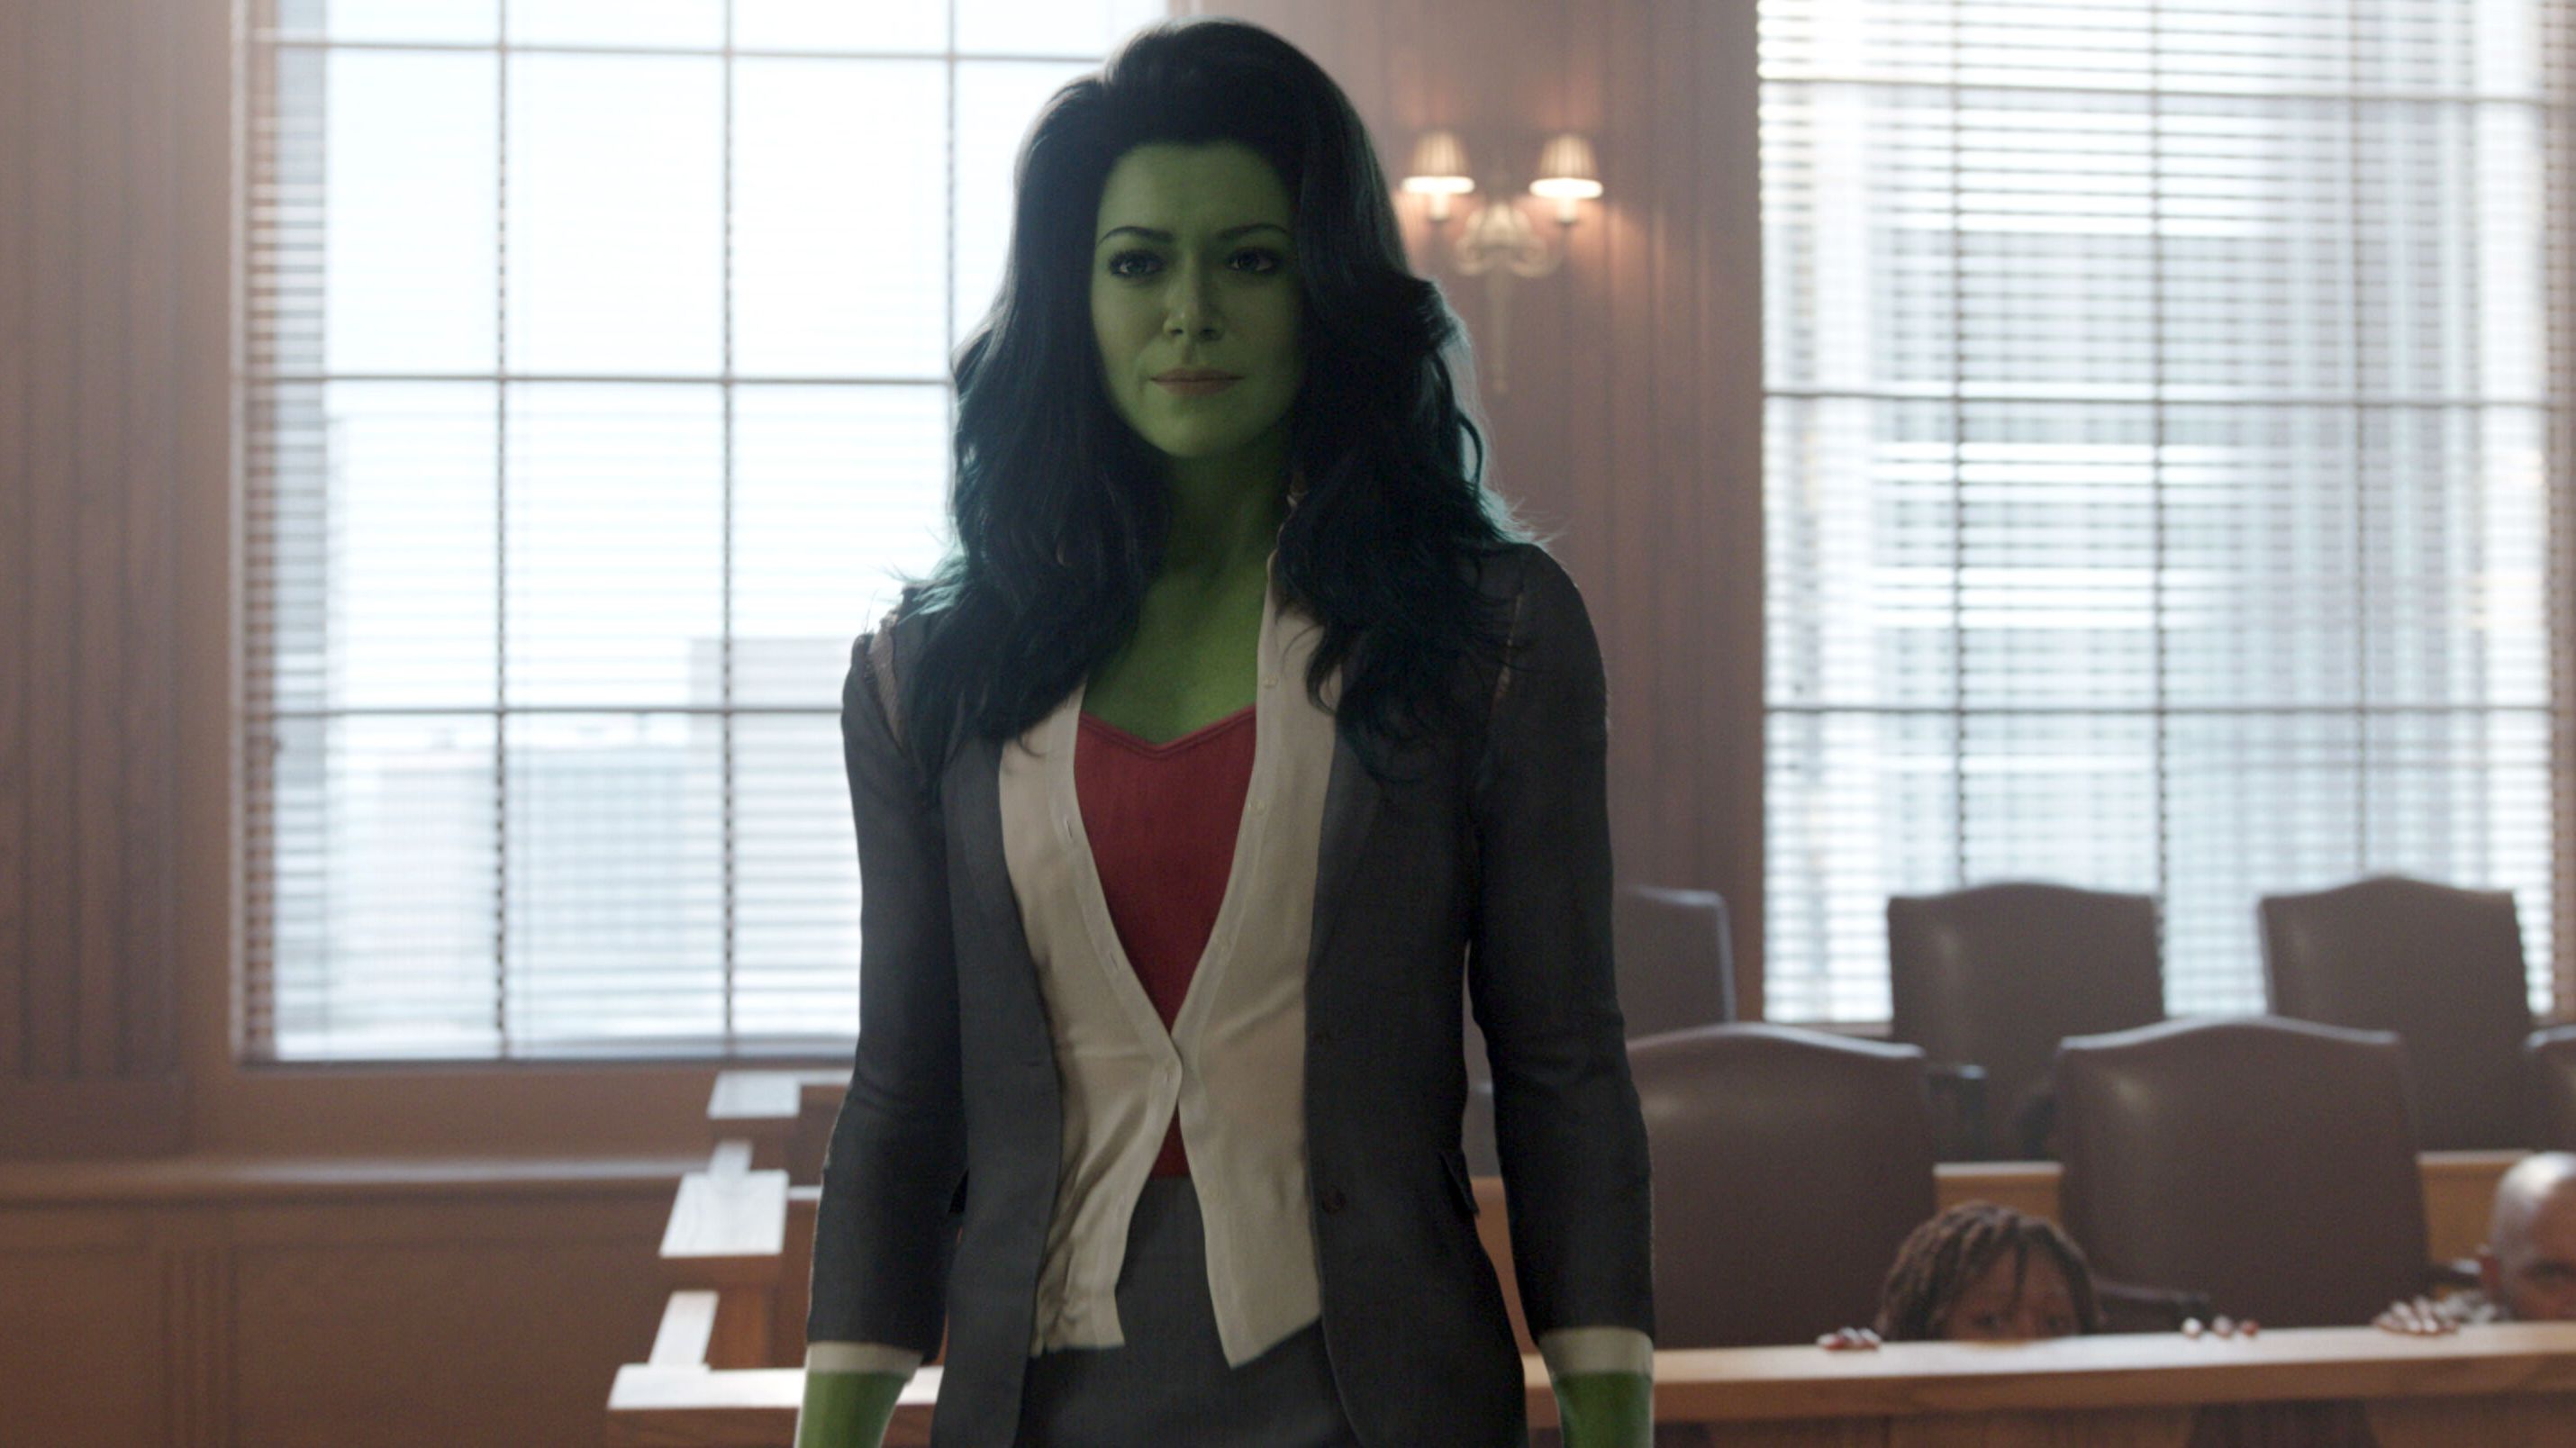 She-Hulk Director Hints at How Episode 1 Sets Up Future MCU Movies